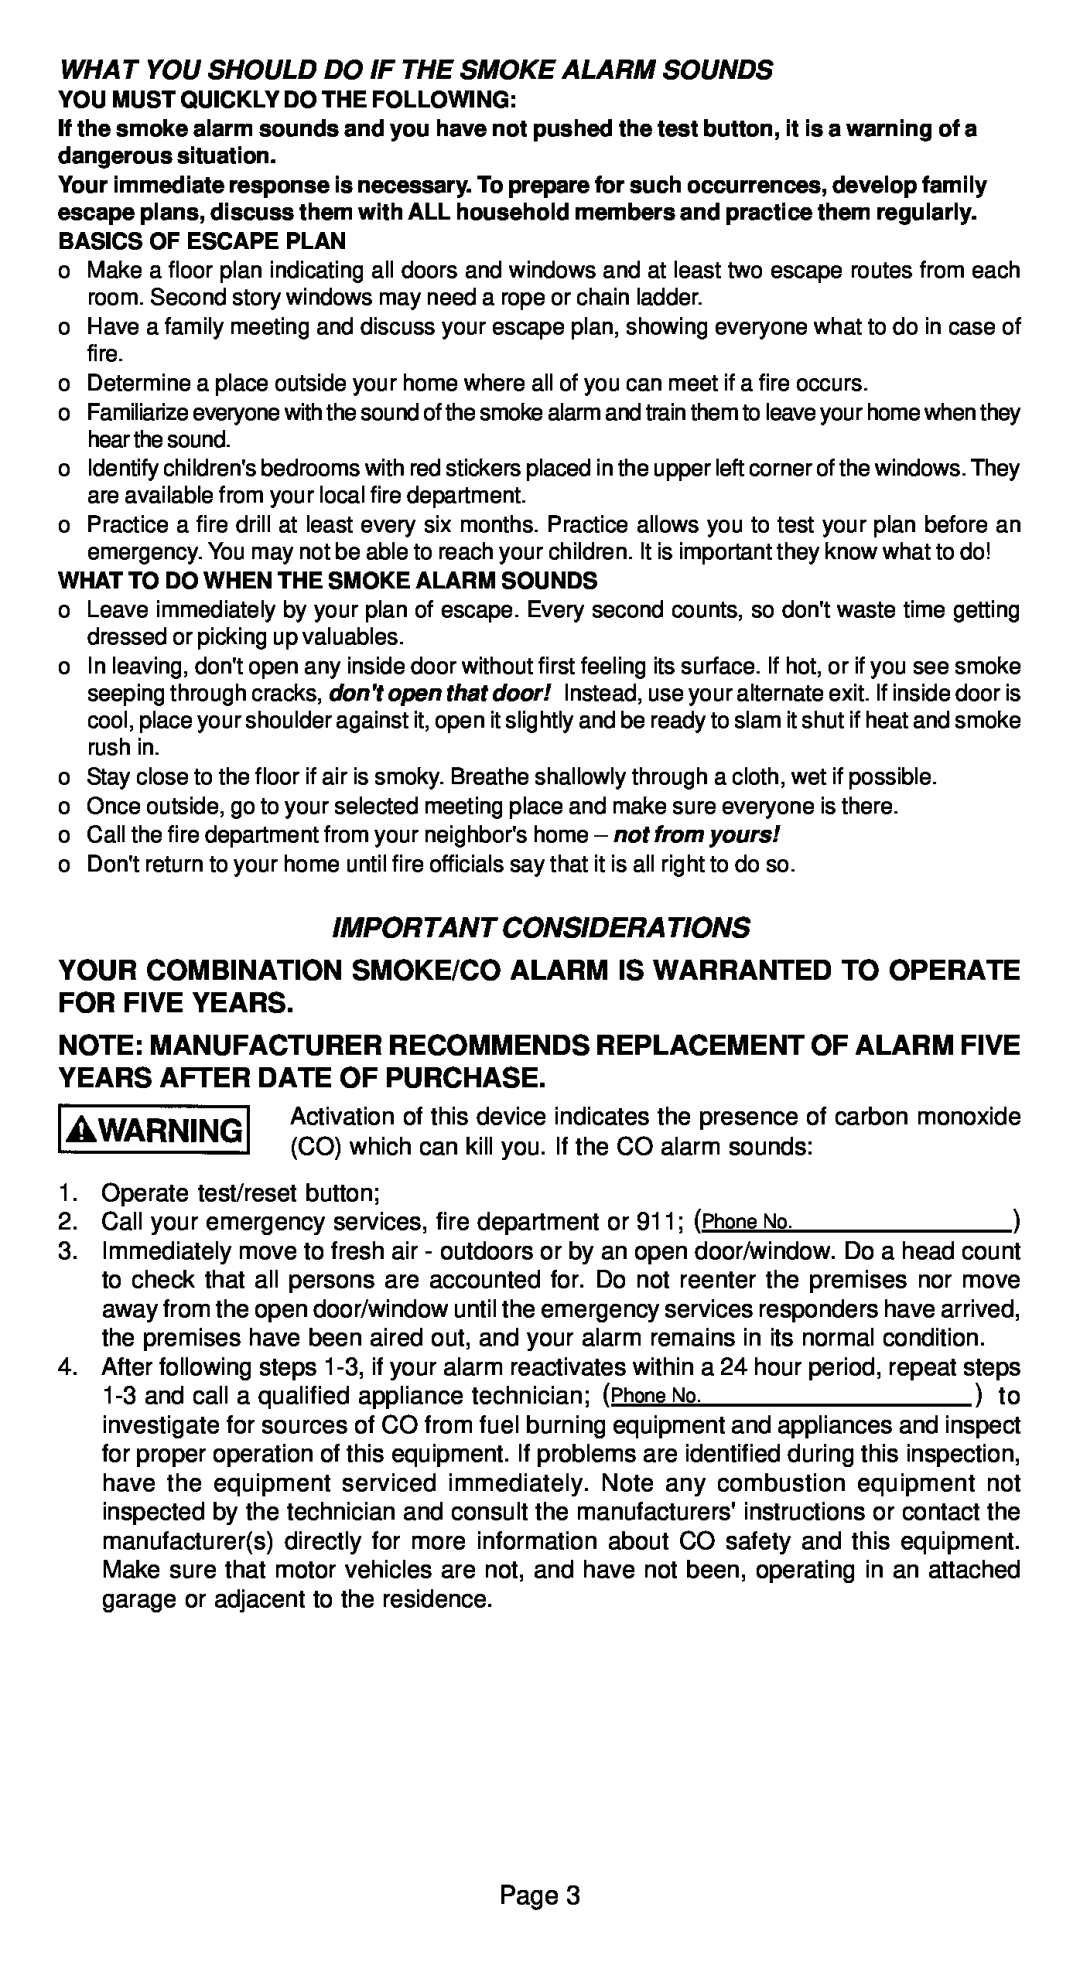 Universal CD-9795 manual What You Should Do If The Smoke Alarm Sounds, Important Considerations 